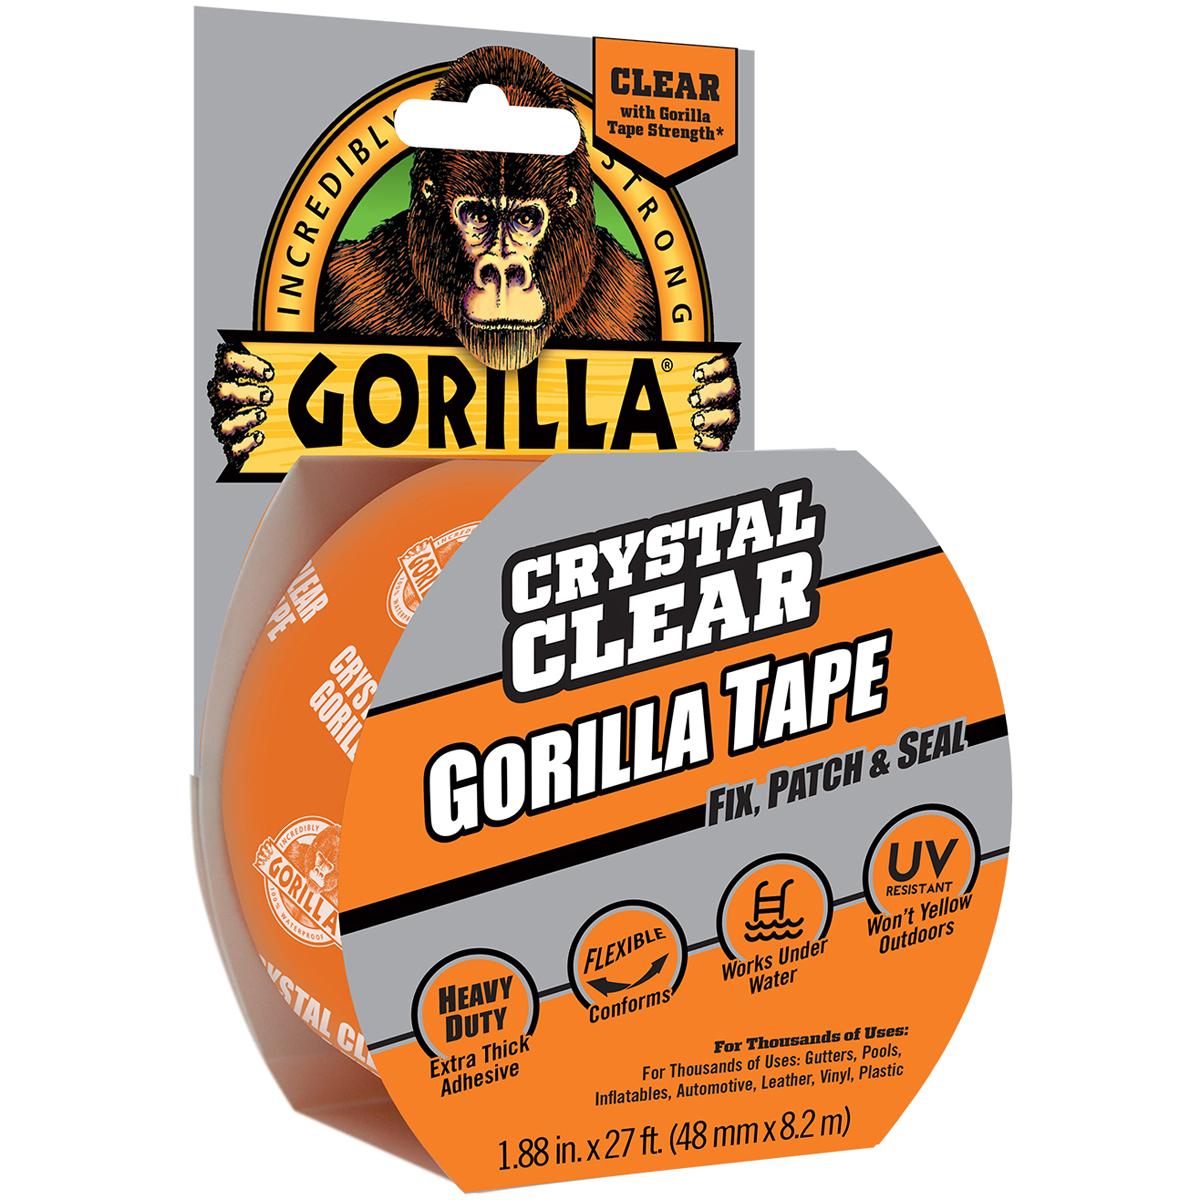 Gorilla Crystal Clear Duct Tape for $3.19